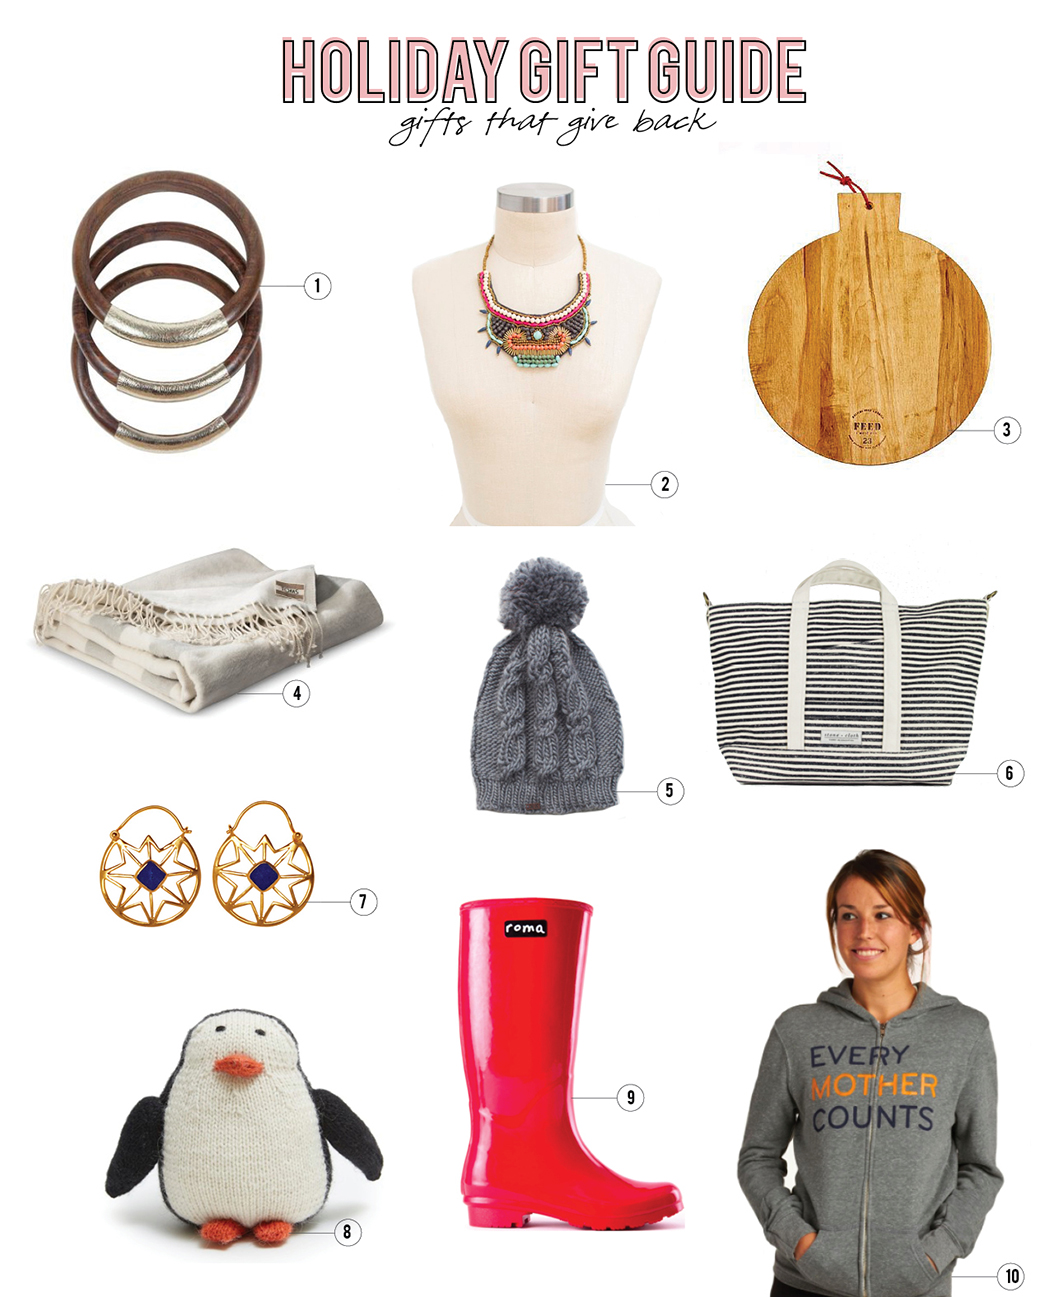 Gifts that Give Back Holiday Gift Guide